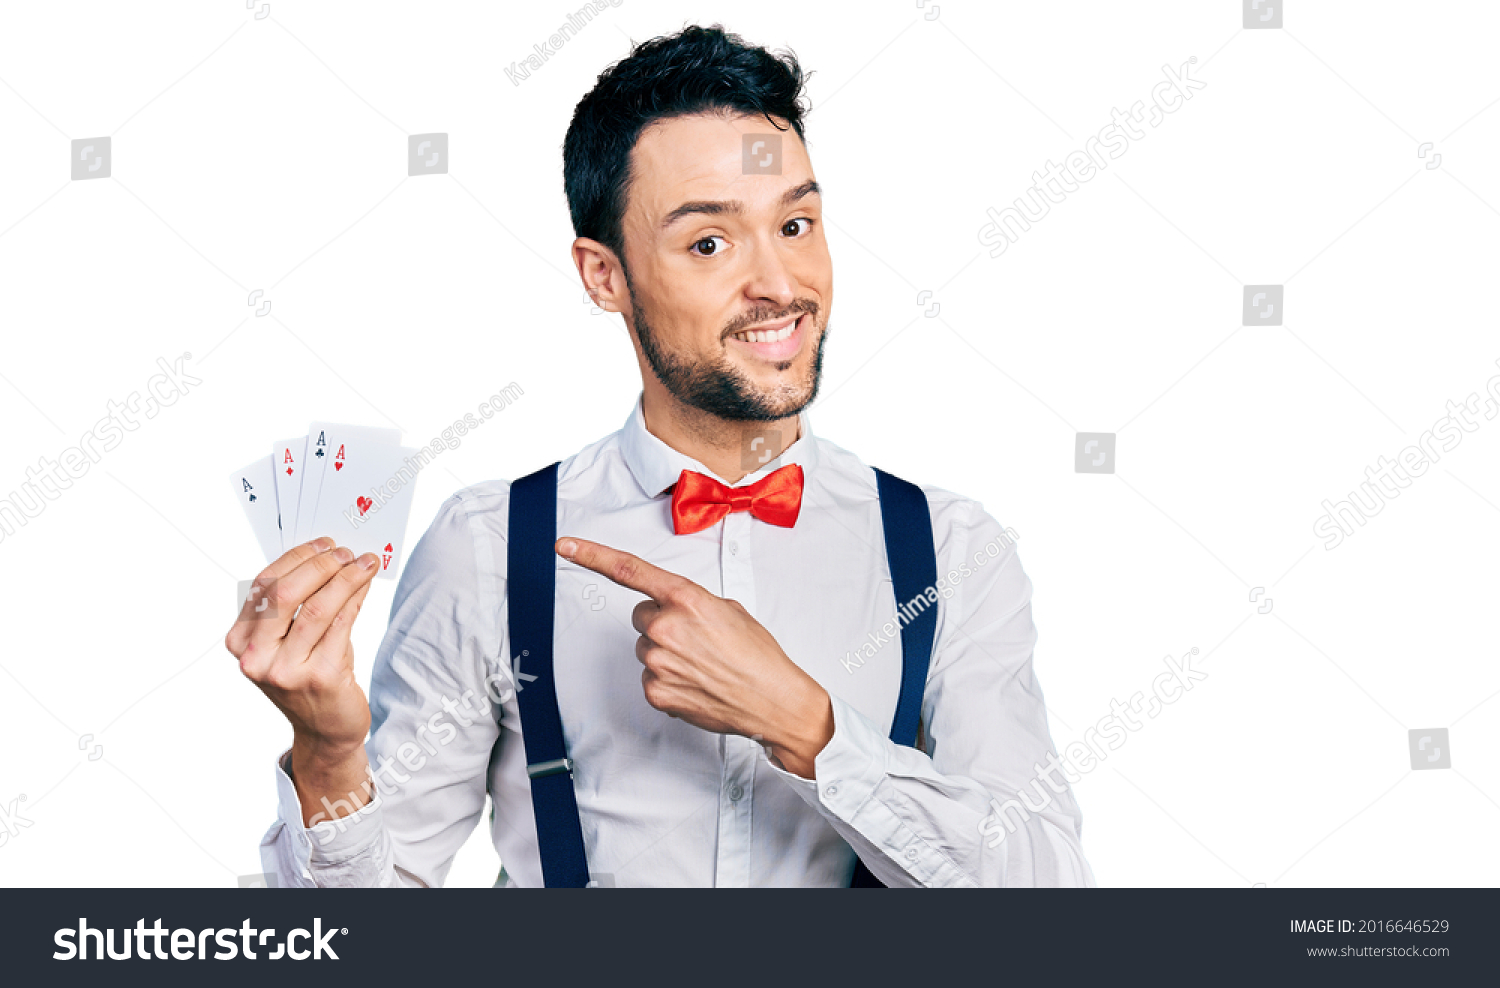 Hispanic man with beard holding poker cards smiling happy pointing with hand and finger  #2016646529